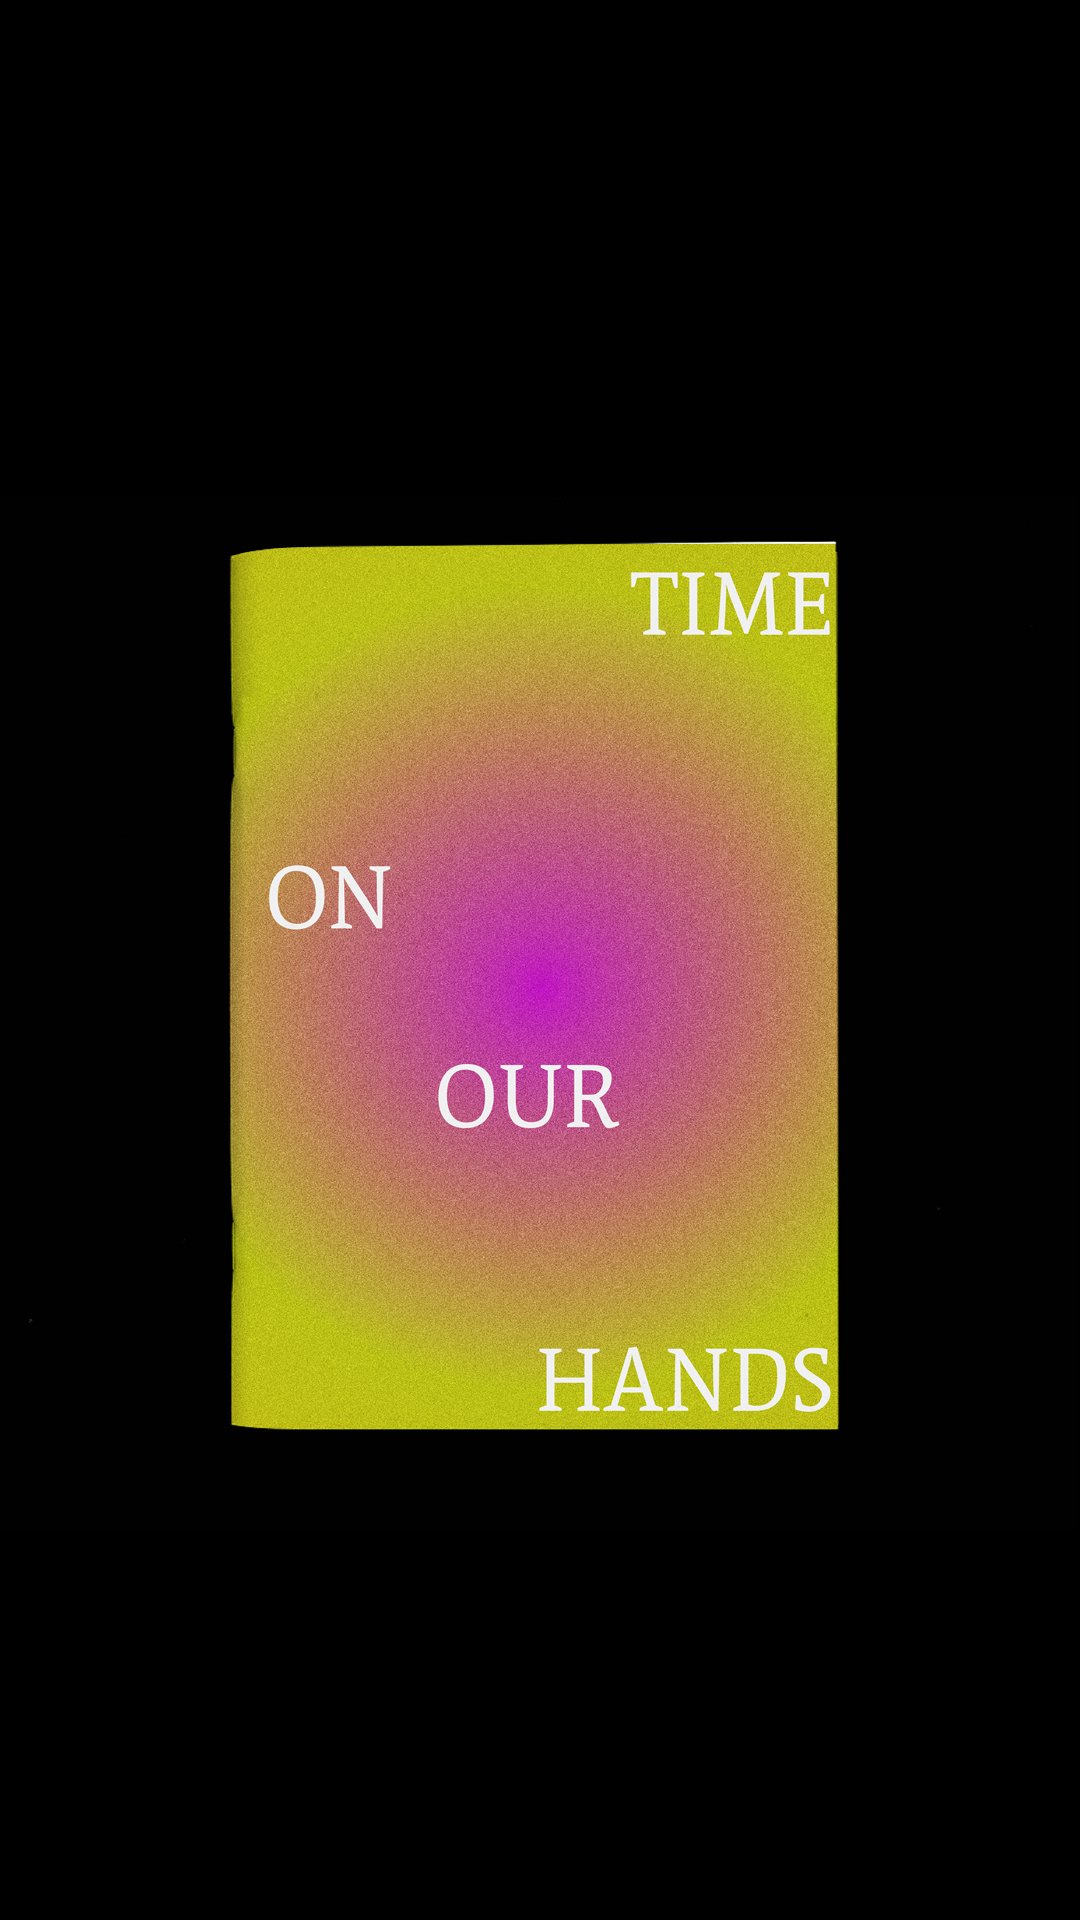 TIME ON OUR HANDS